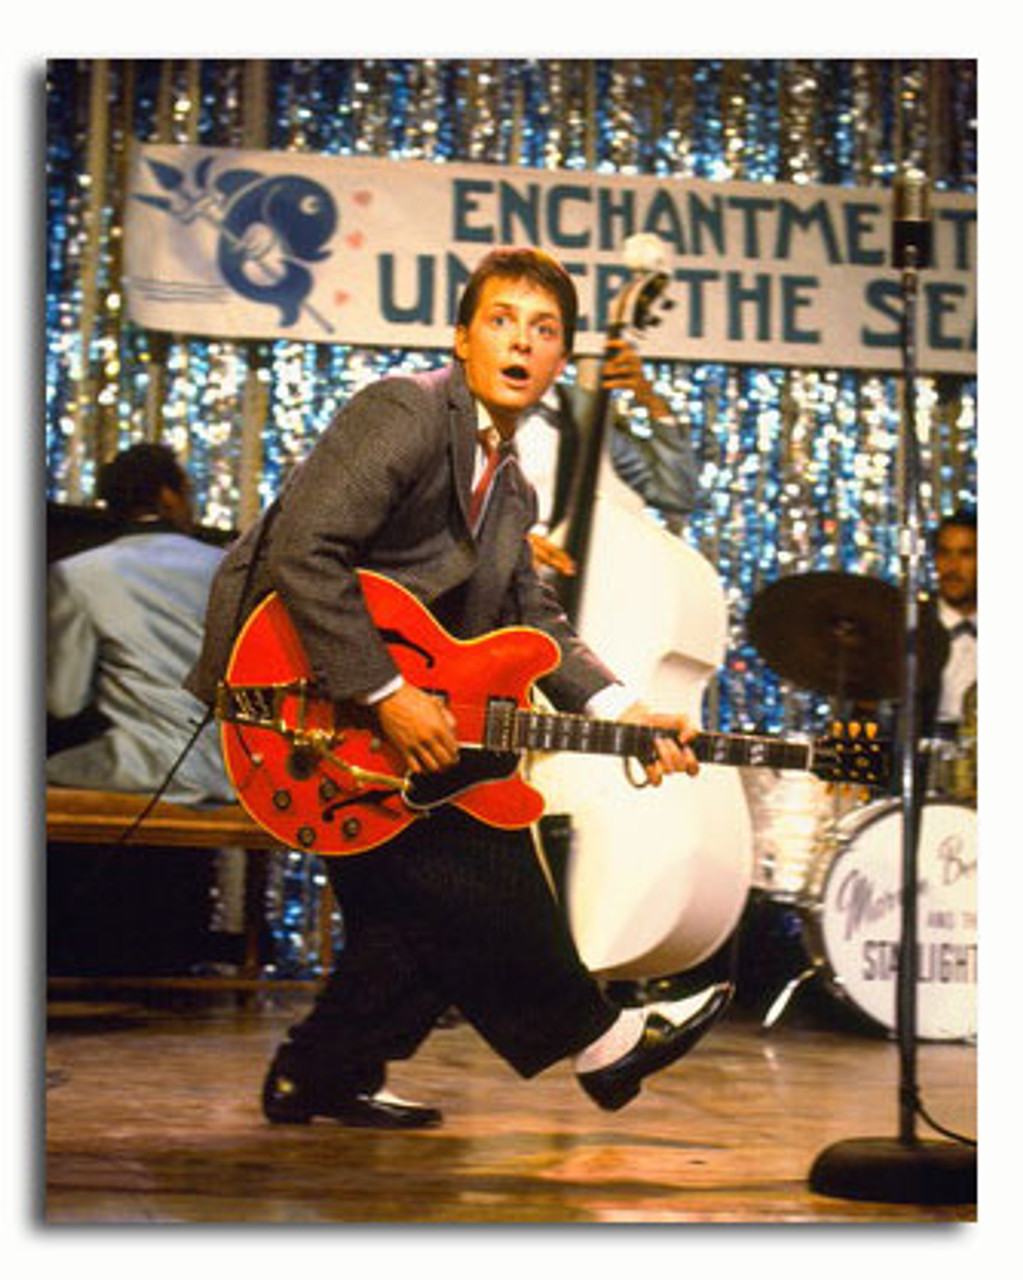 SS3307408) Movie picture of Michael J. Fox buy celebrity photo and posters at Starstills.com